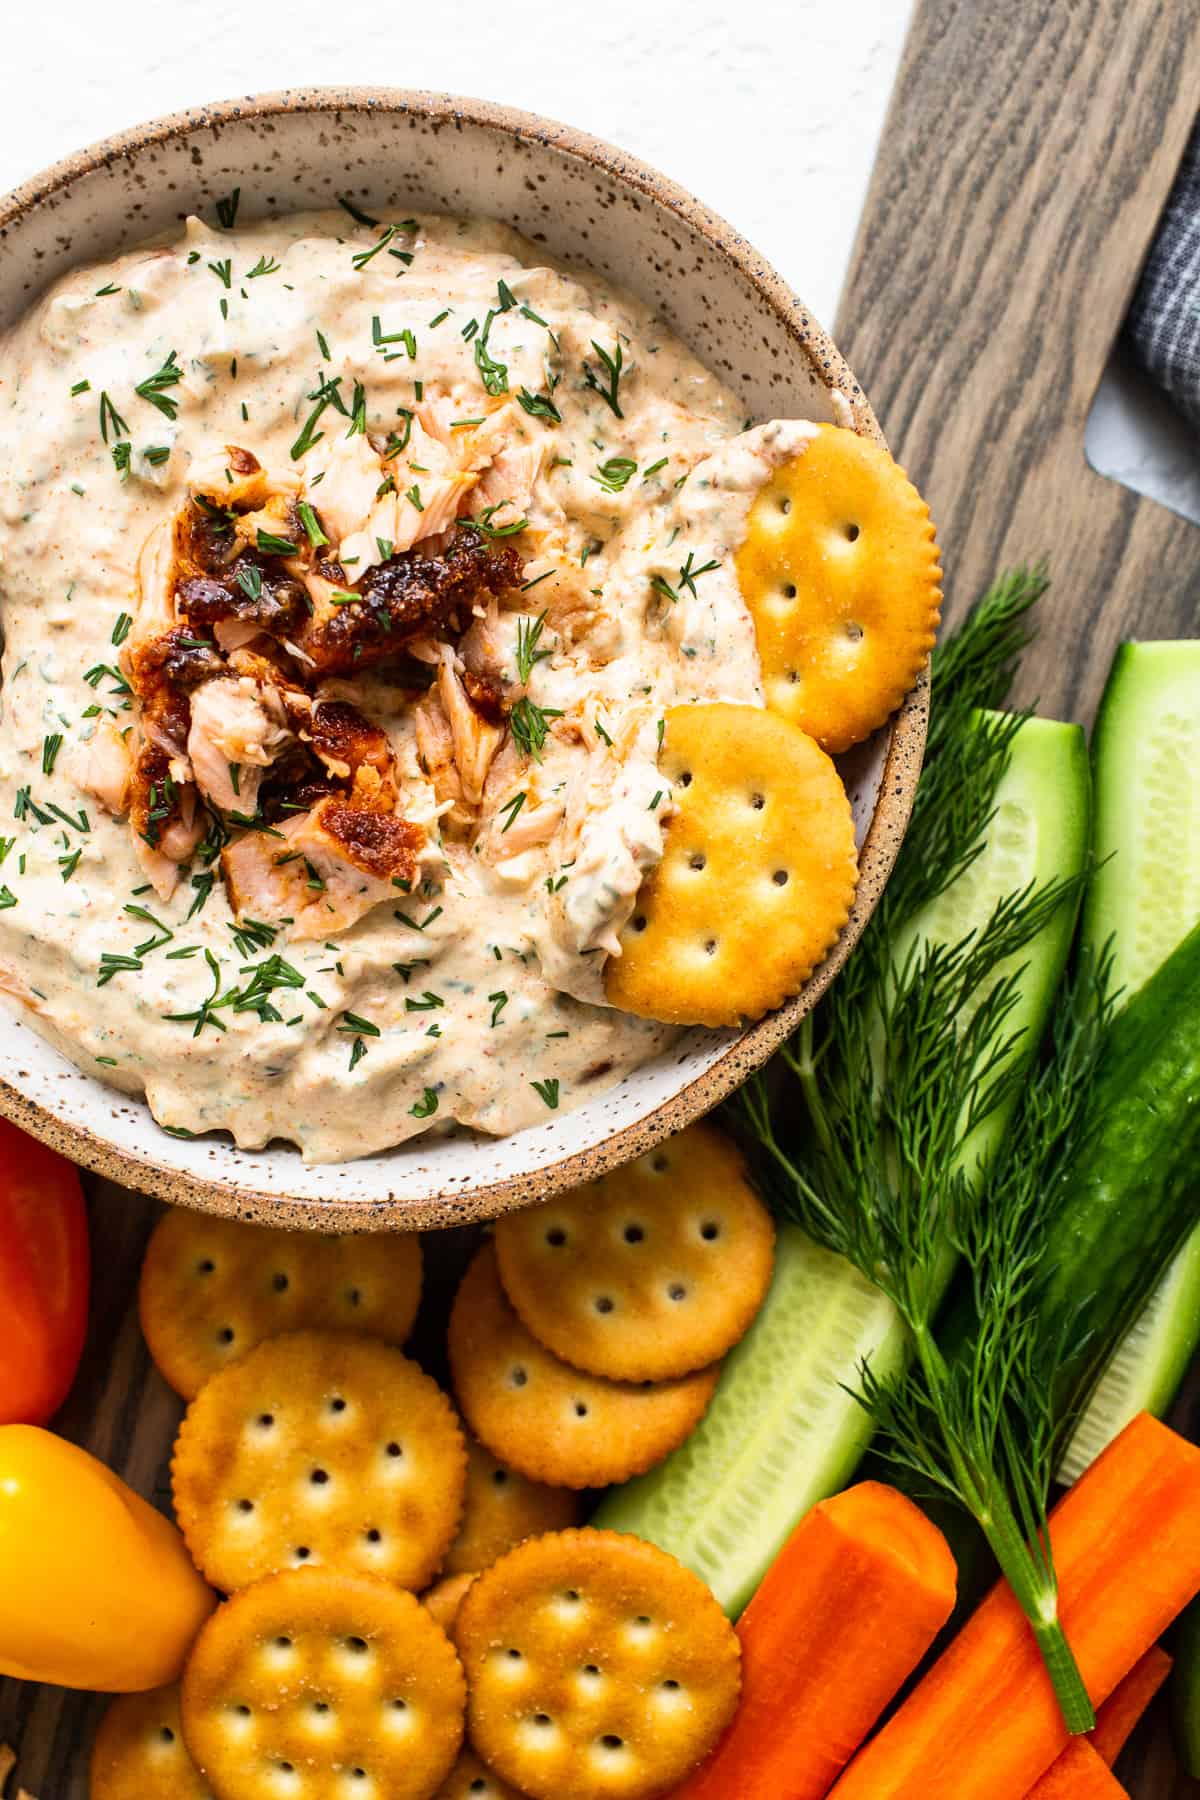 Smoked salmon dip in a bowl.